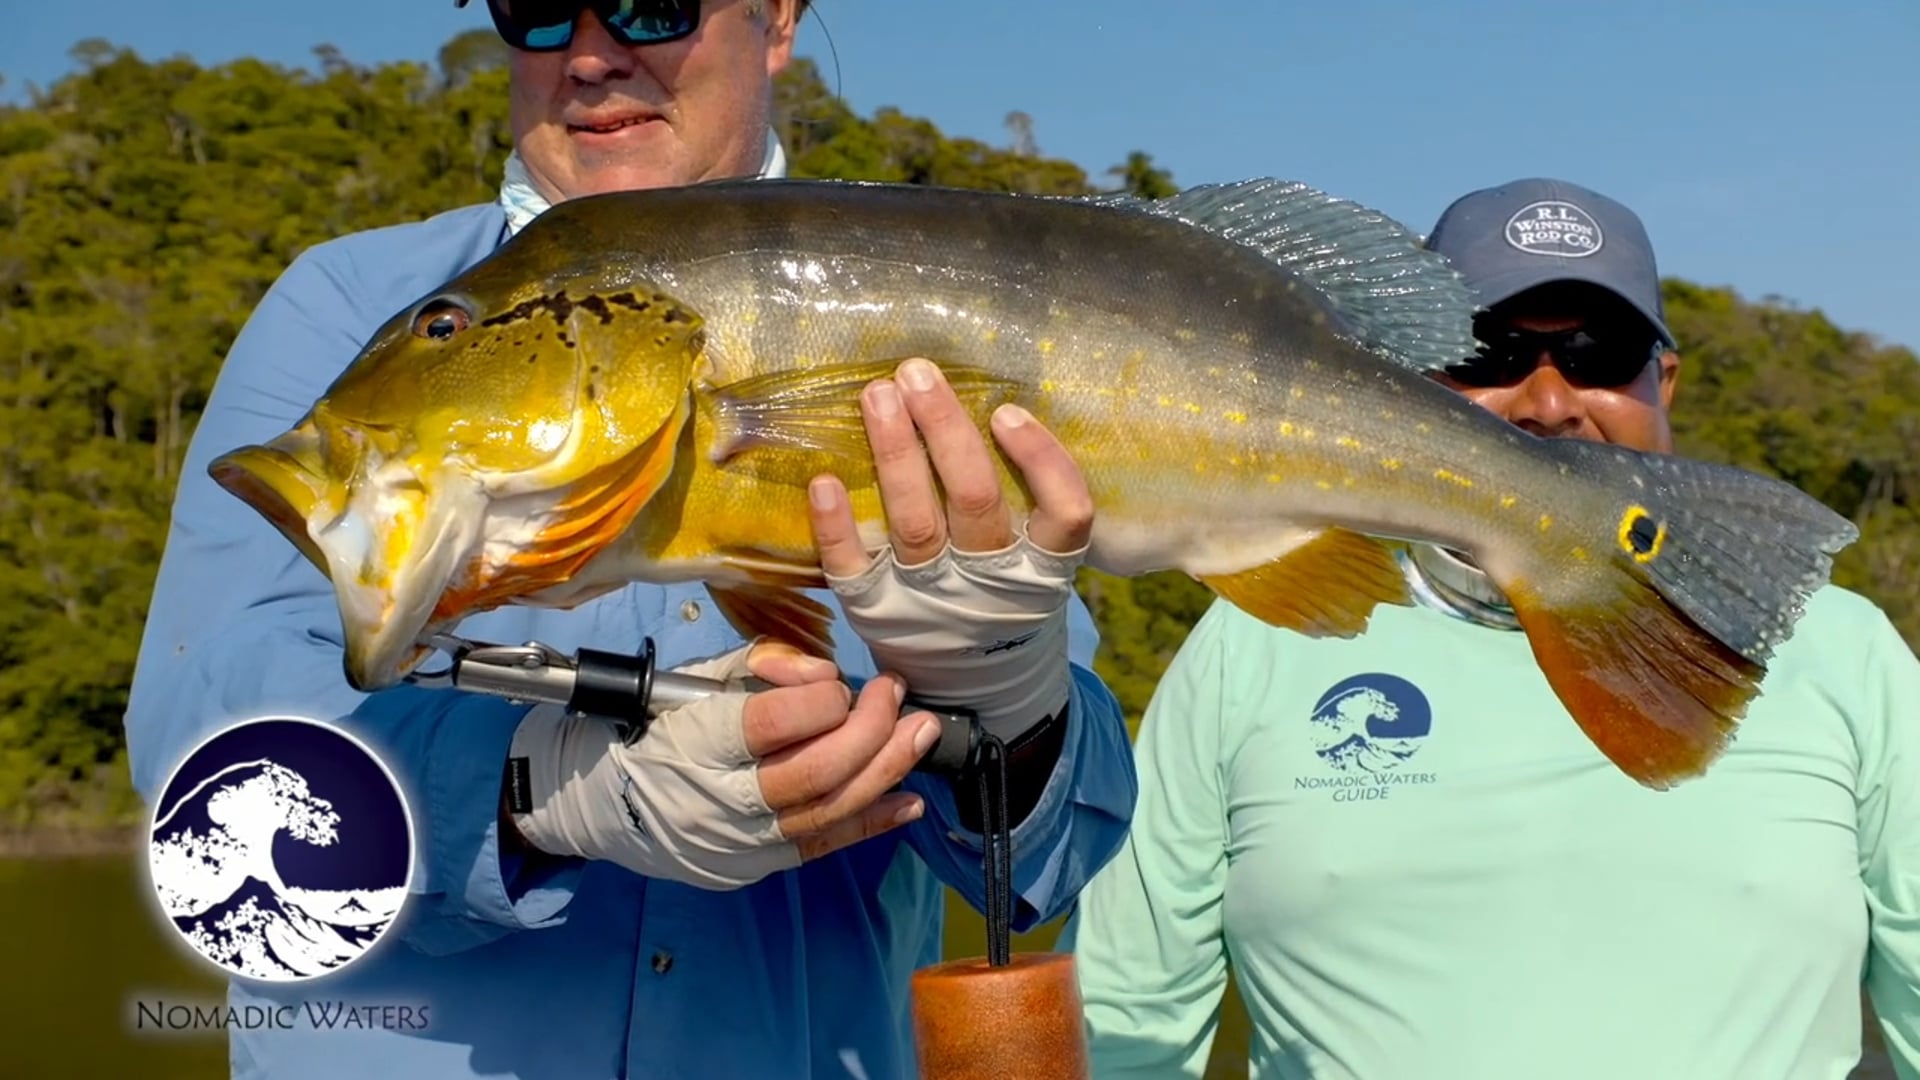 Discovery Channel's Seasons on the Fly with Nomadic Waters